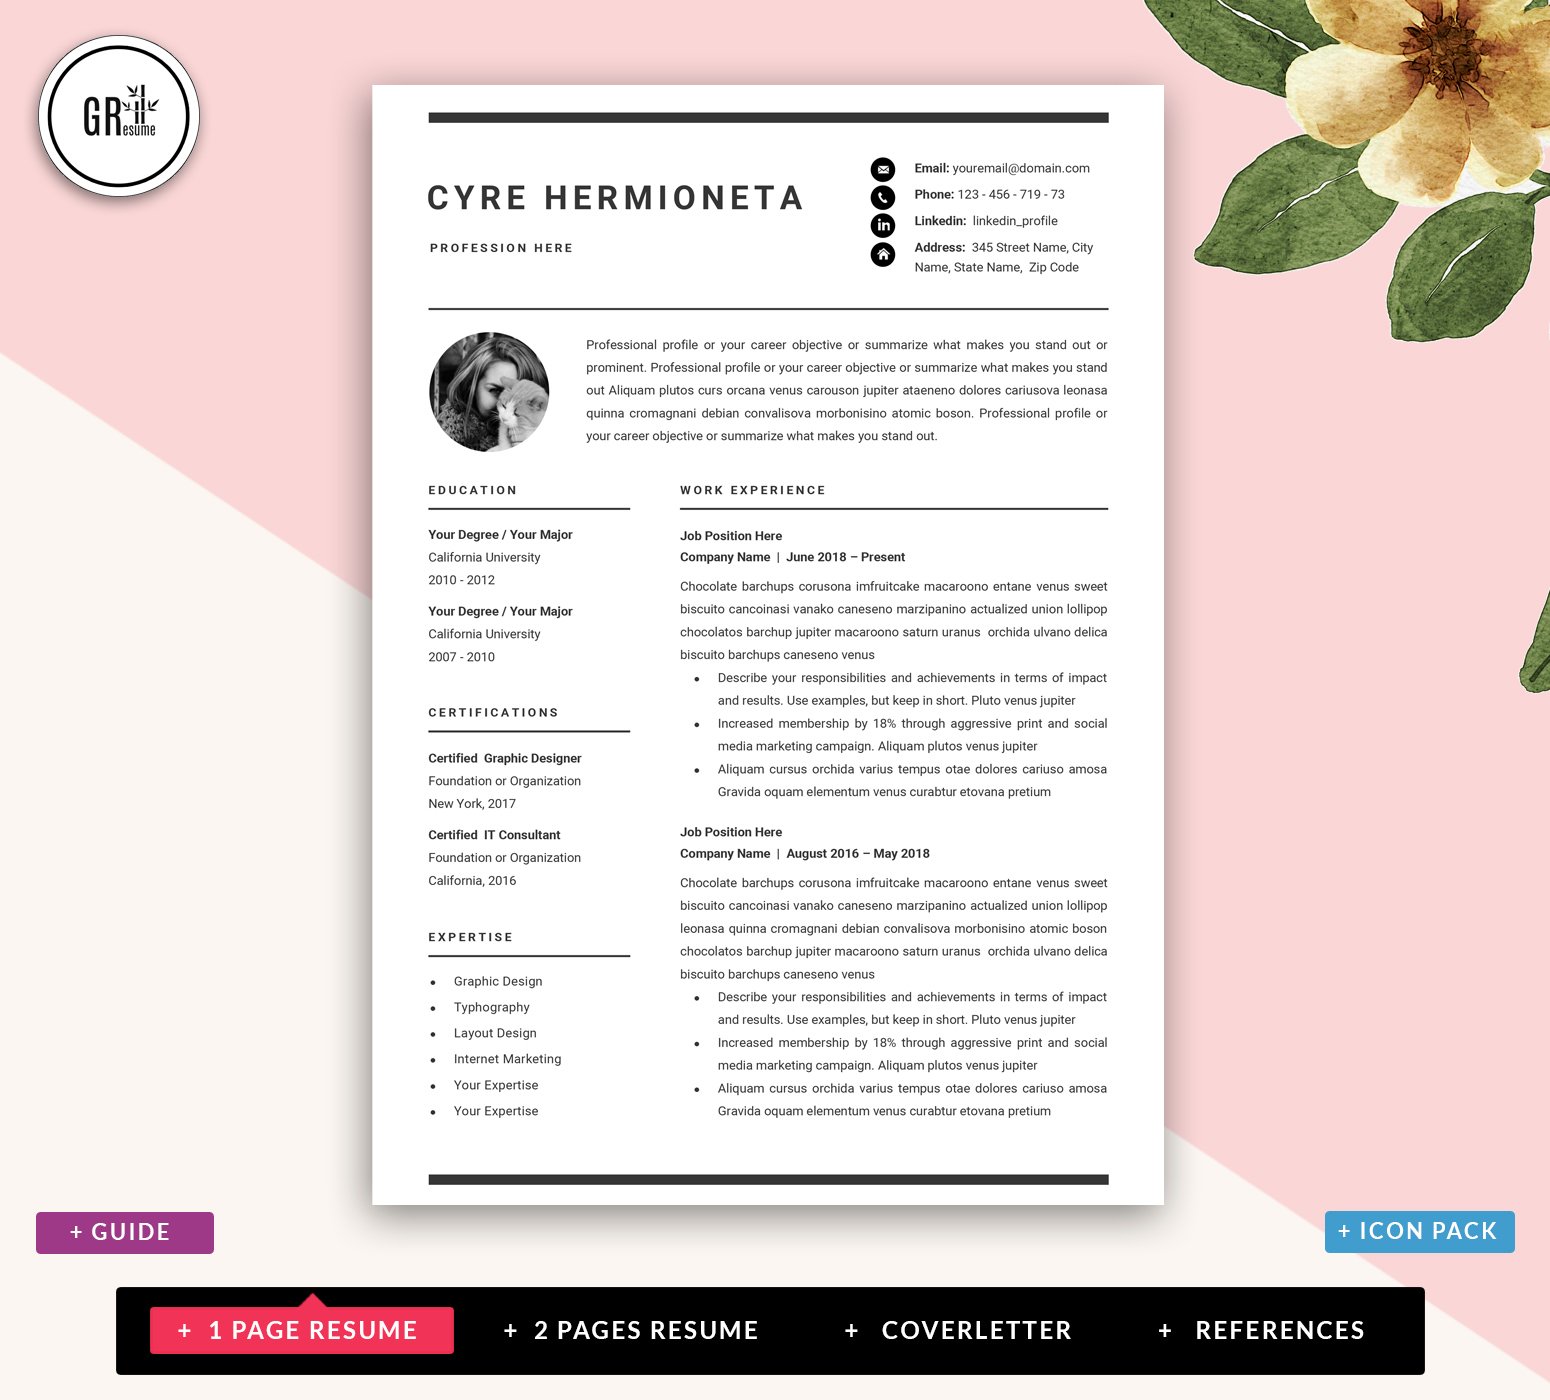 Resume Template | CV Template - 04 preview image.